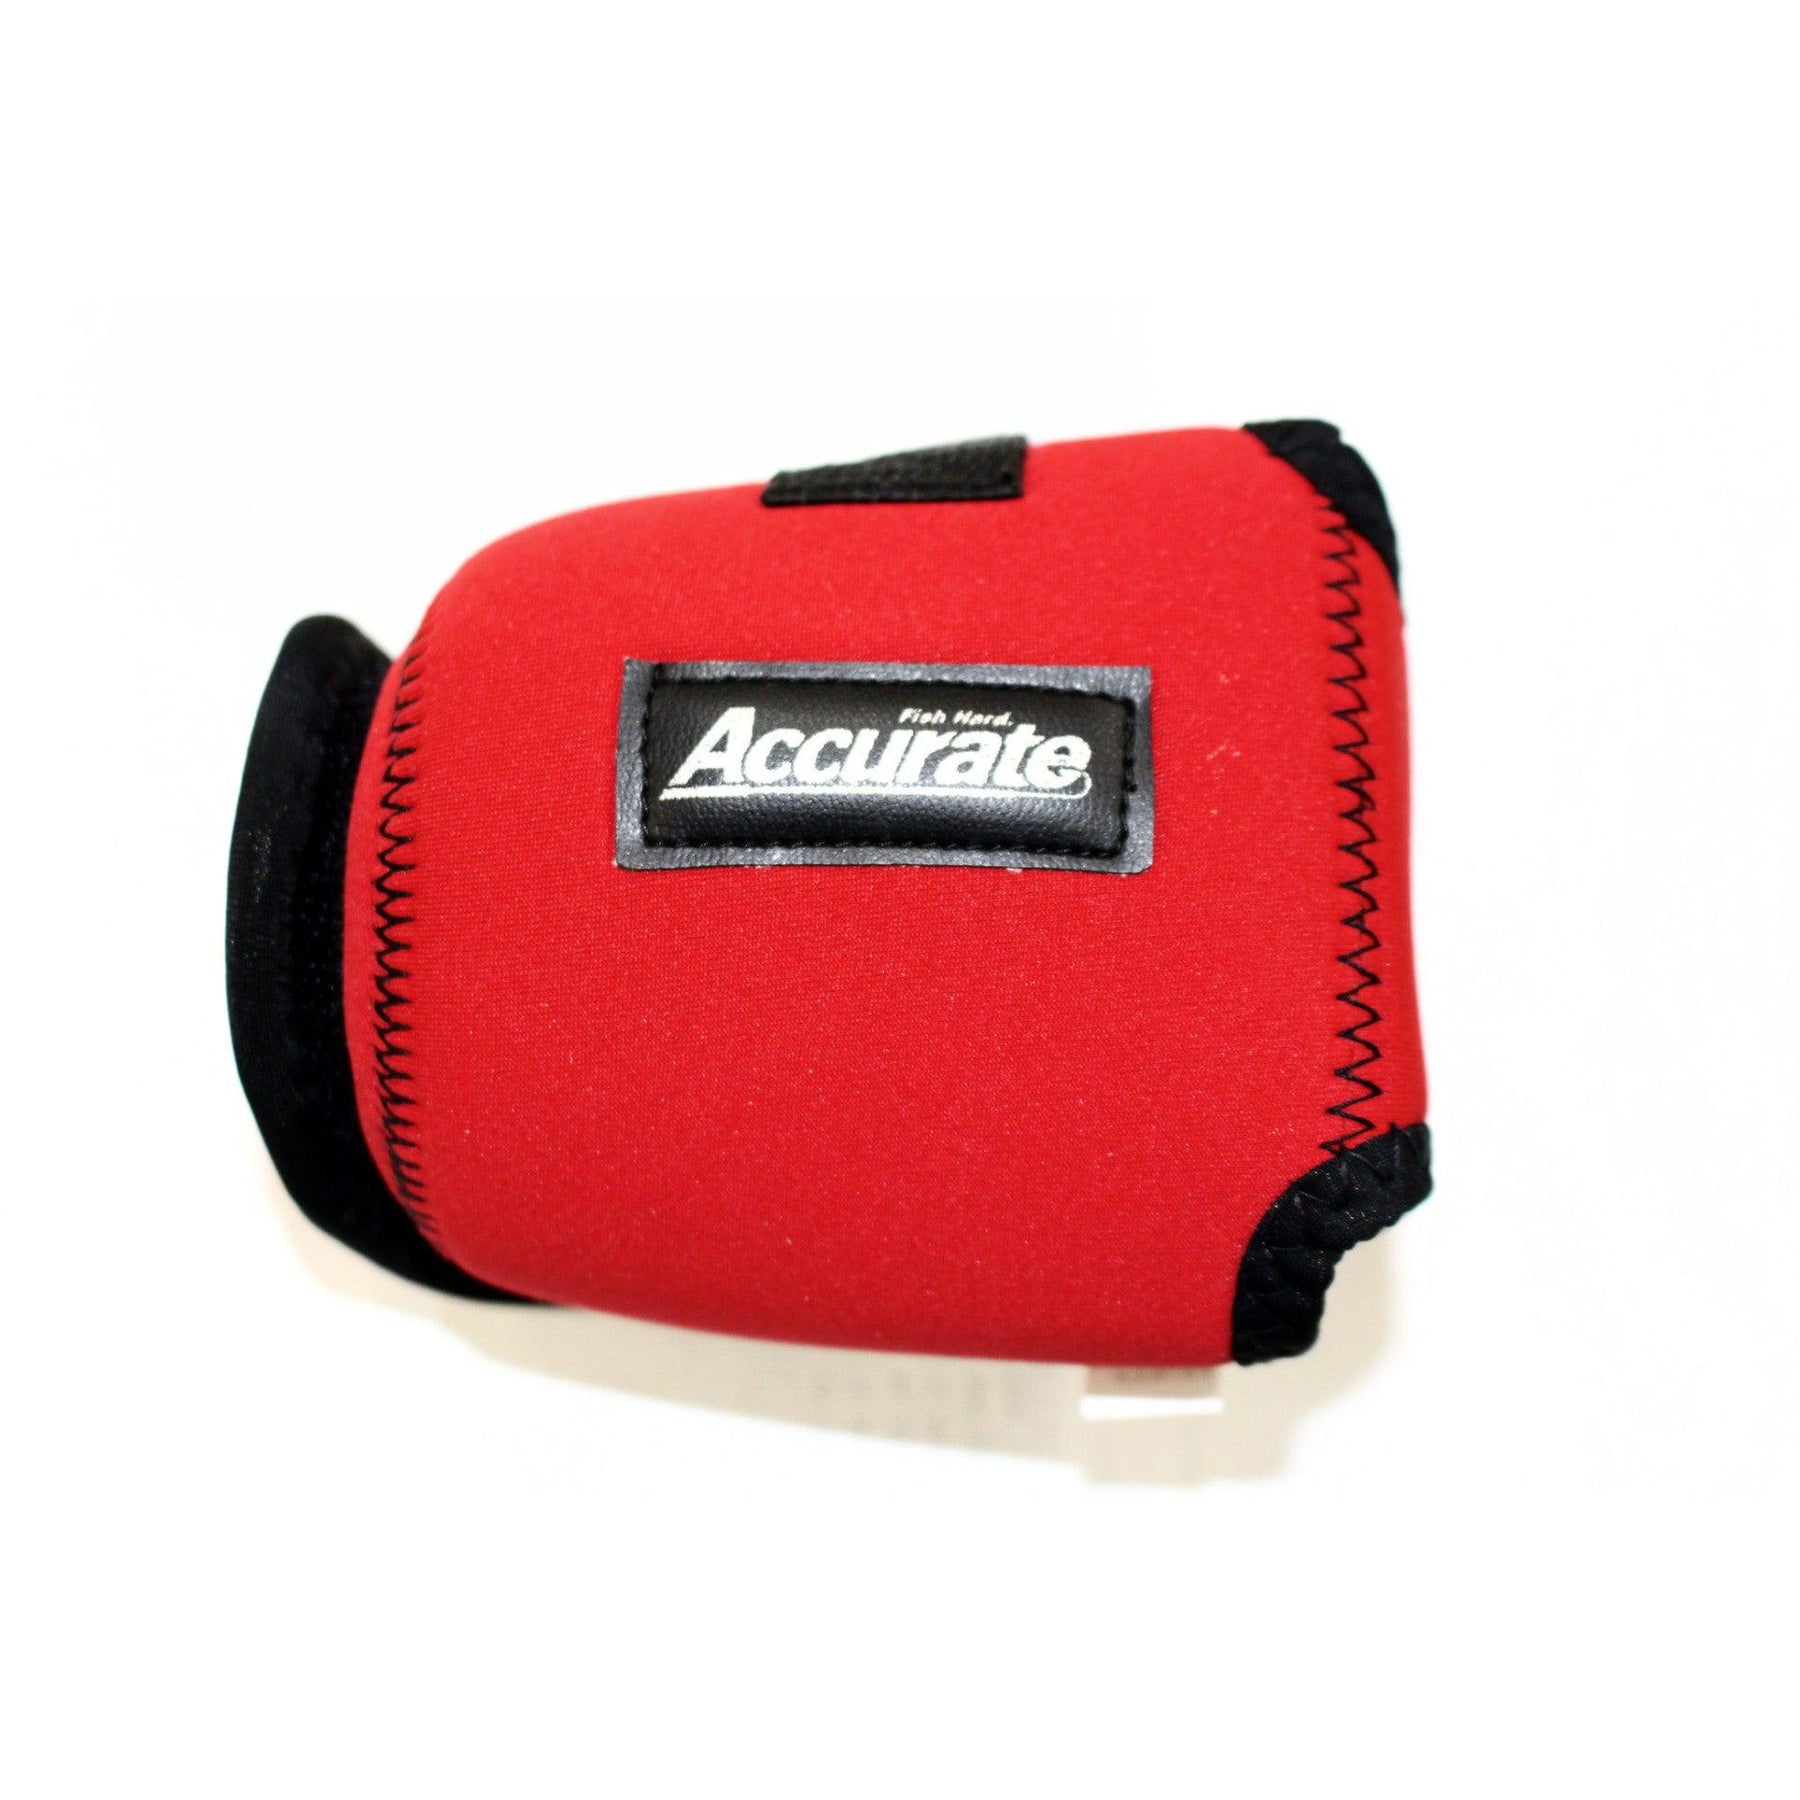 Fishing Rod Cover Sleeve and Reel Cover Glove fits Spinning and